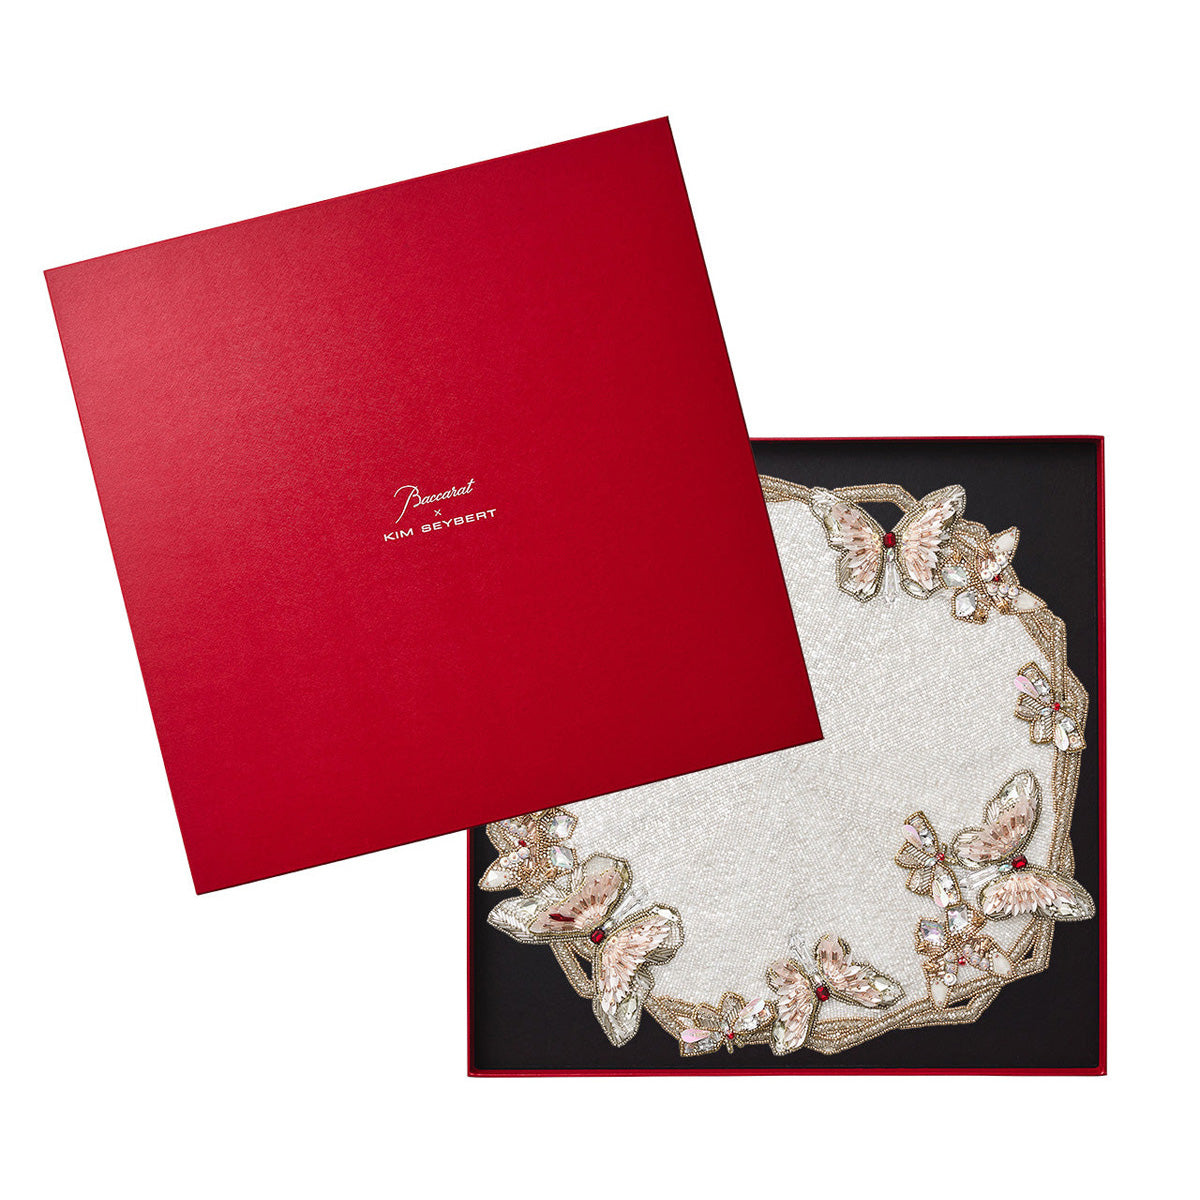 Diamant Butterflies Placemat in White & Blush - Set of 2 in a Gift Box by Kim Seybert Additional Image-5